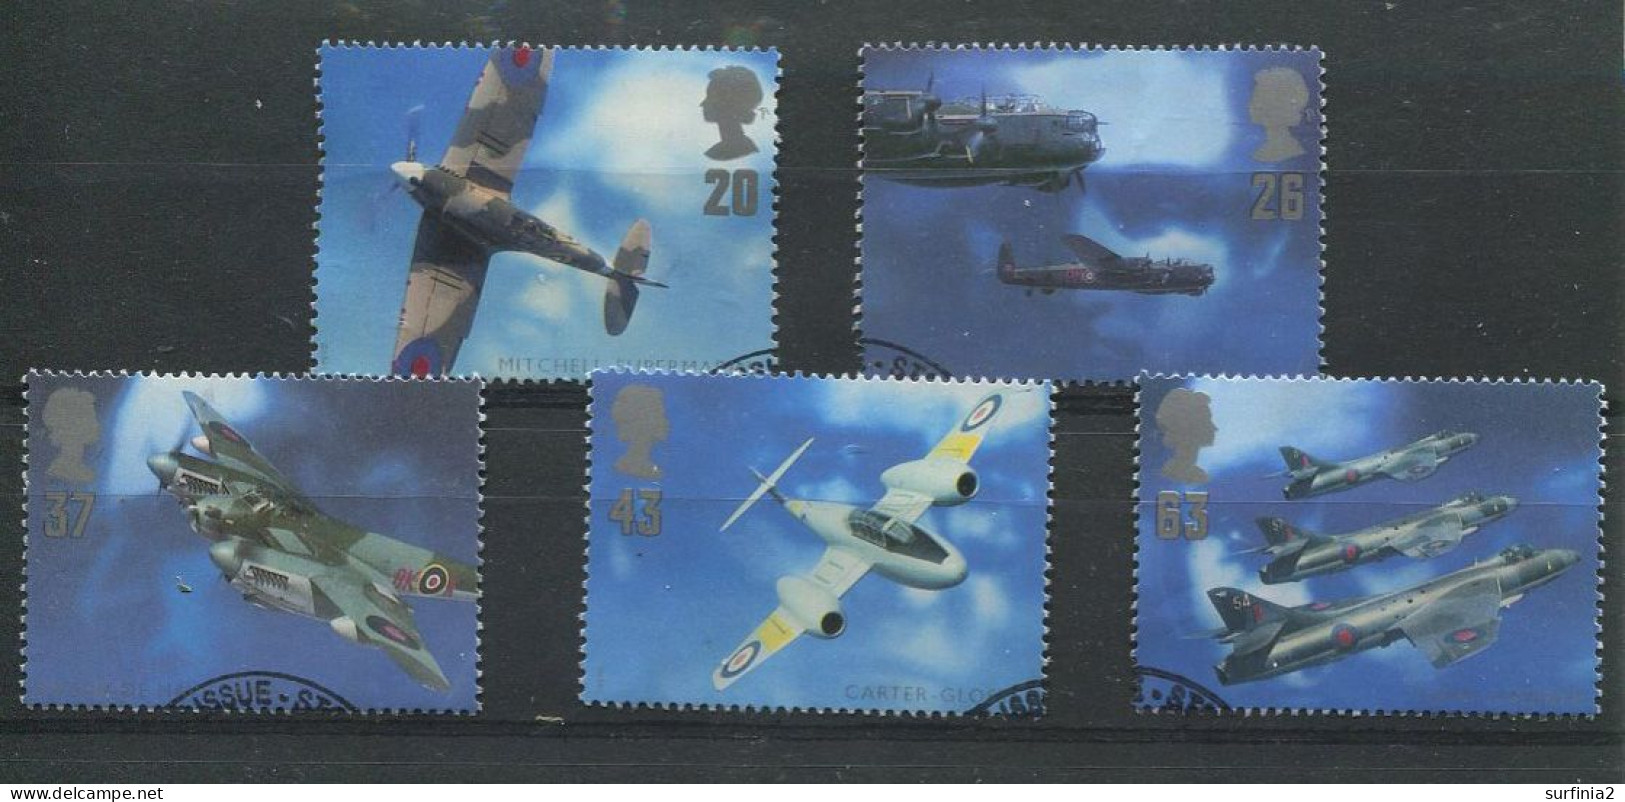 STAMPS - 1997 AIRCRAFT DESIGNERS SET VFU - Used Stamps